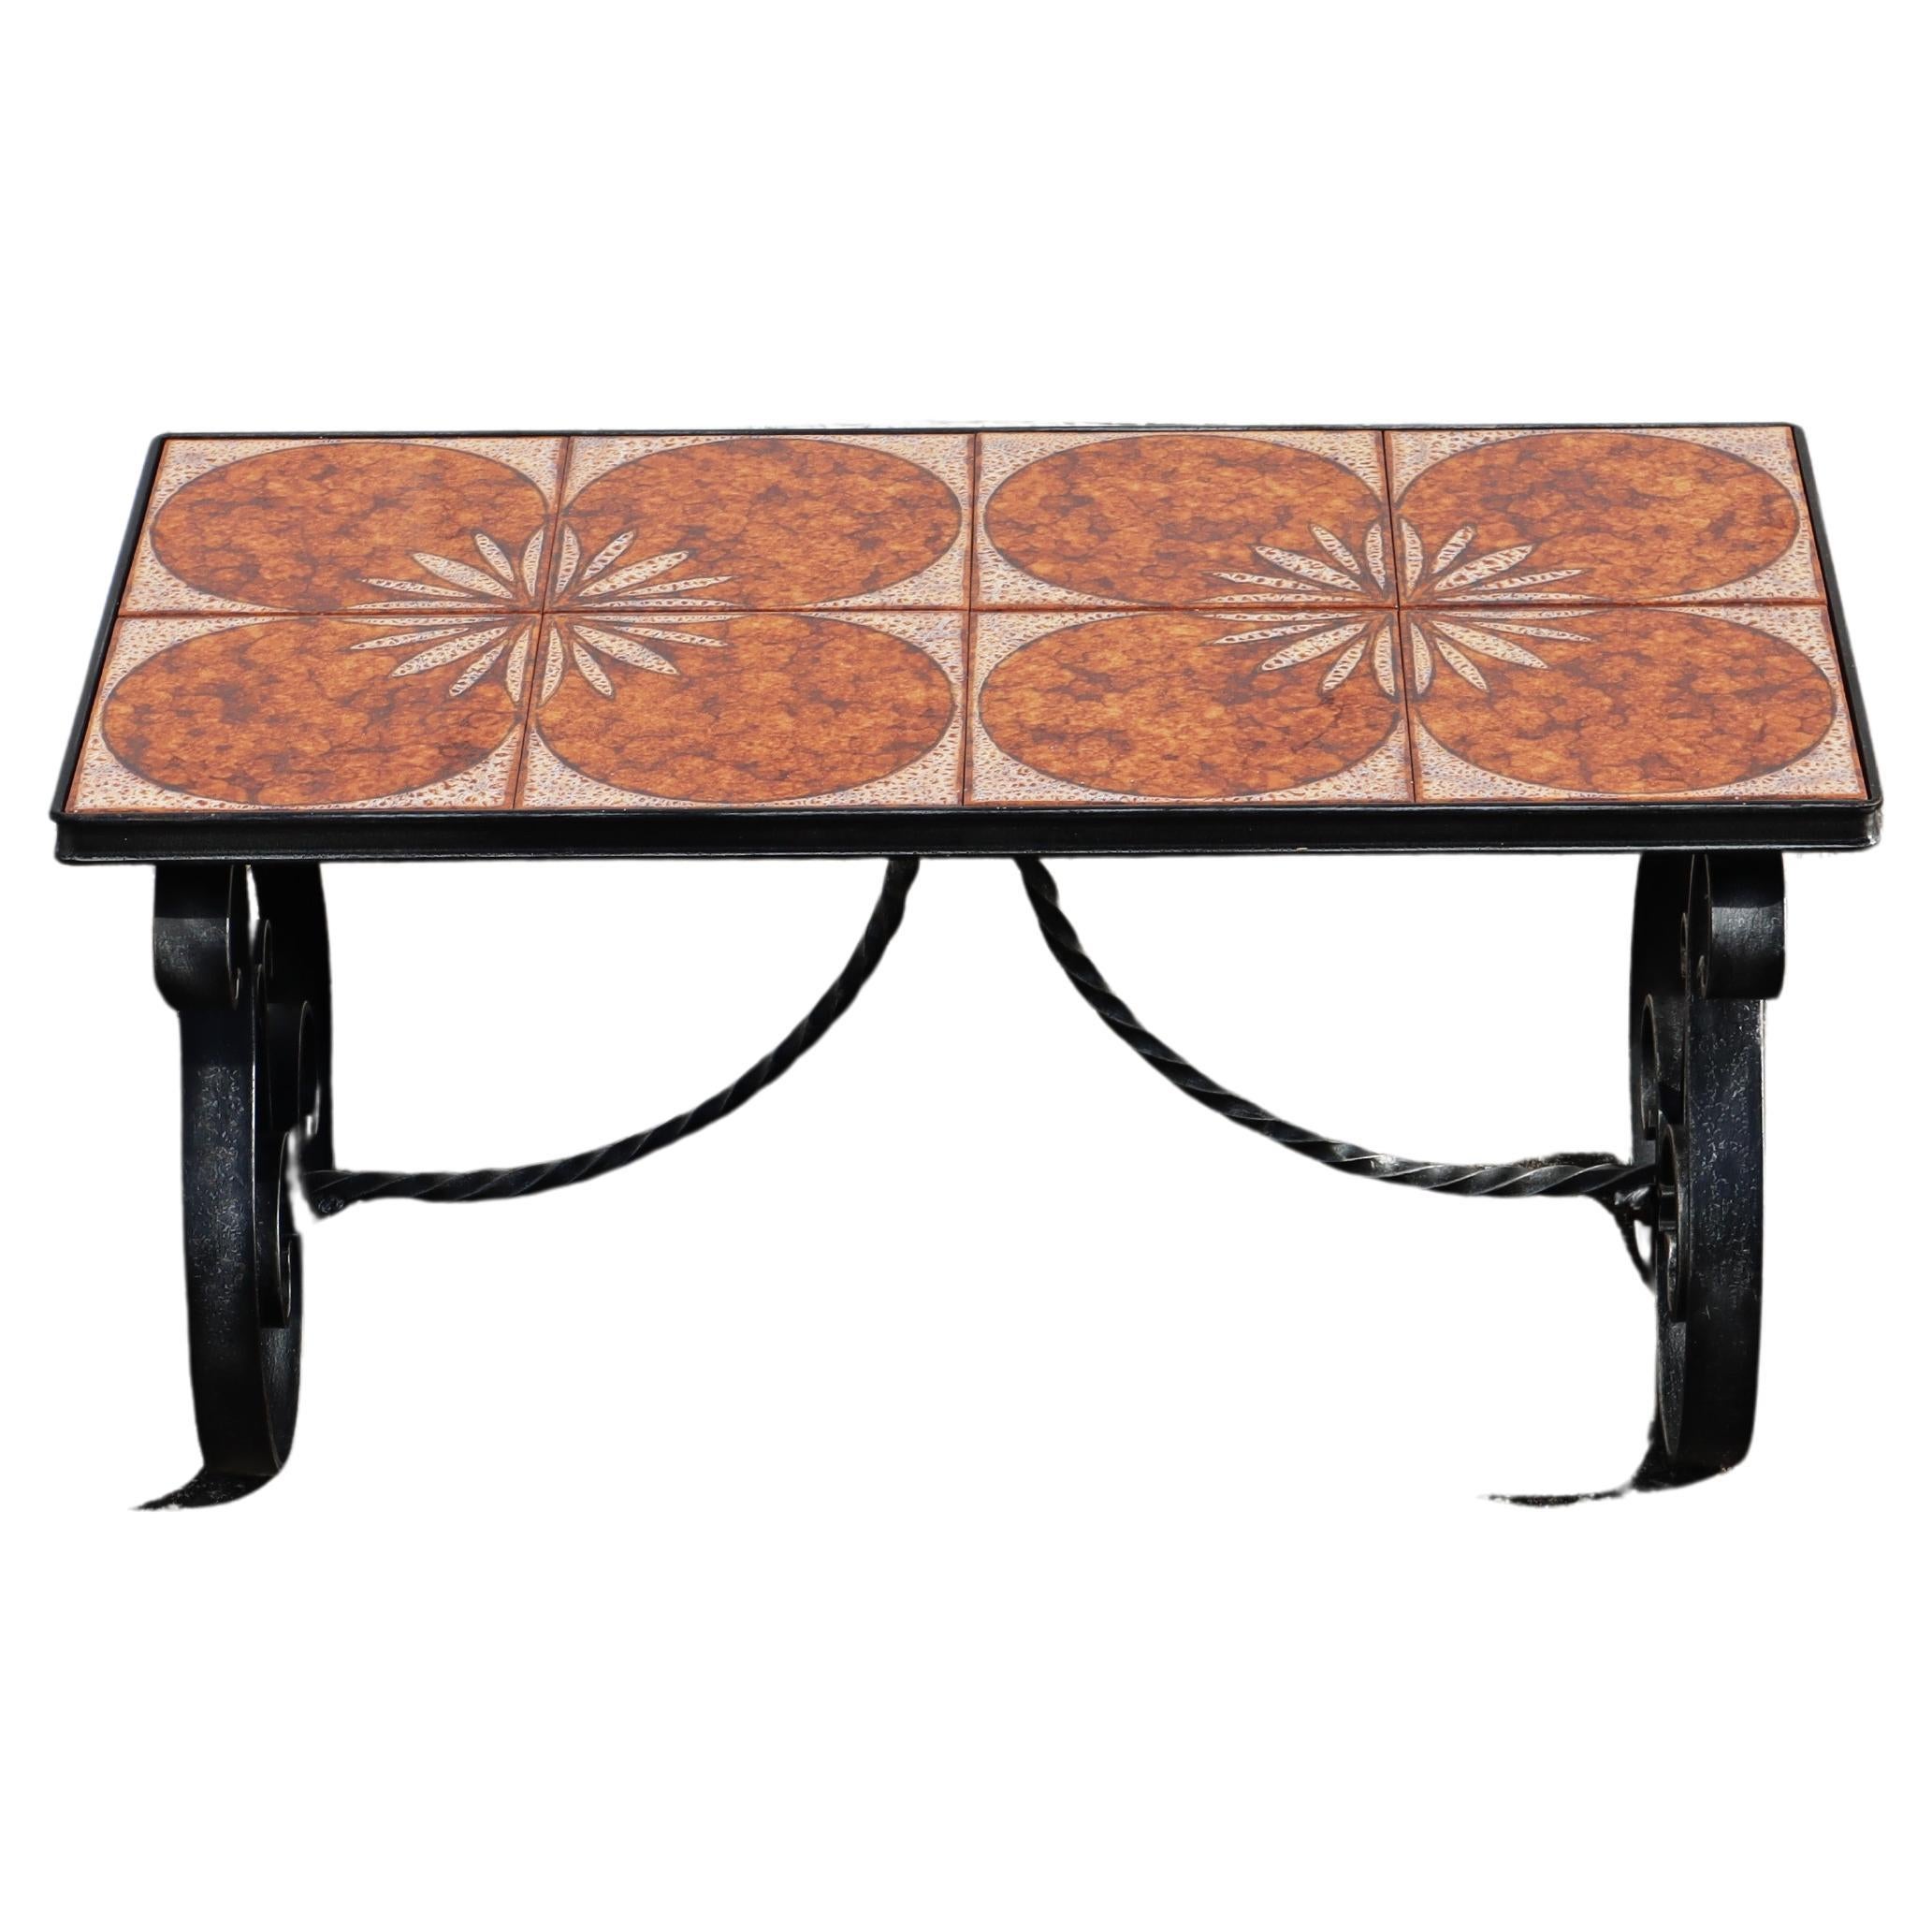 French Vintage Mid-Century Wrought Iron and Ceramic Coffee Table from the 60s

Artfully designed Ceramic - gorgeous Colors from the 60s - beautiful Blacksmithing

A rare unique Table for your Living - Lounge or Patio.

nice vintage condition- the